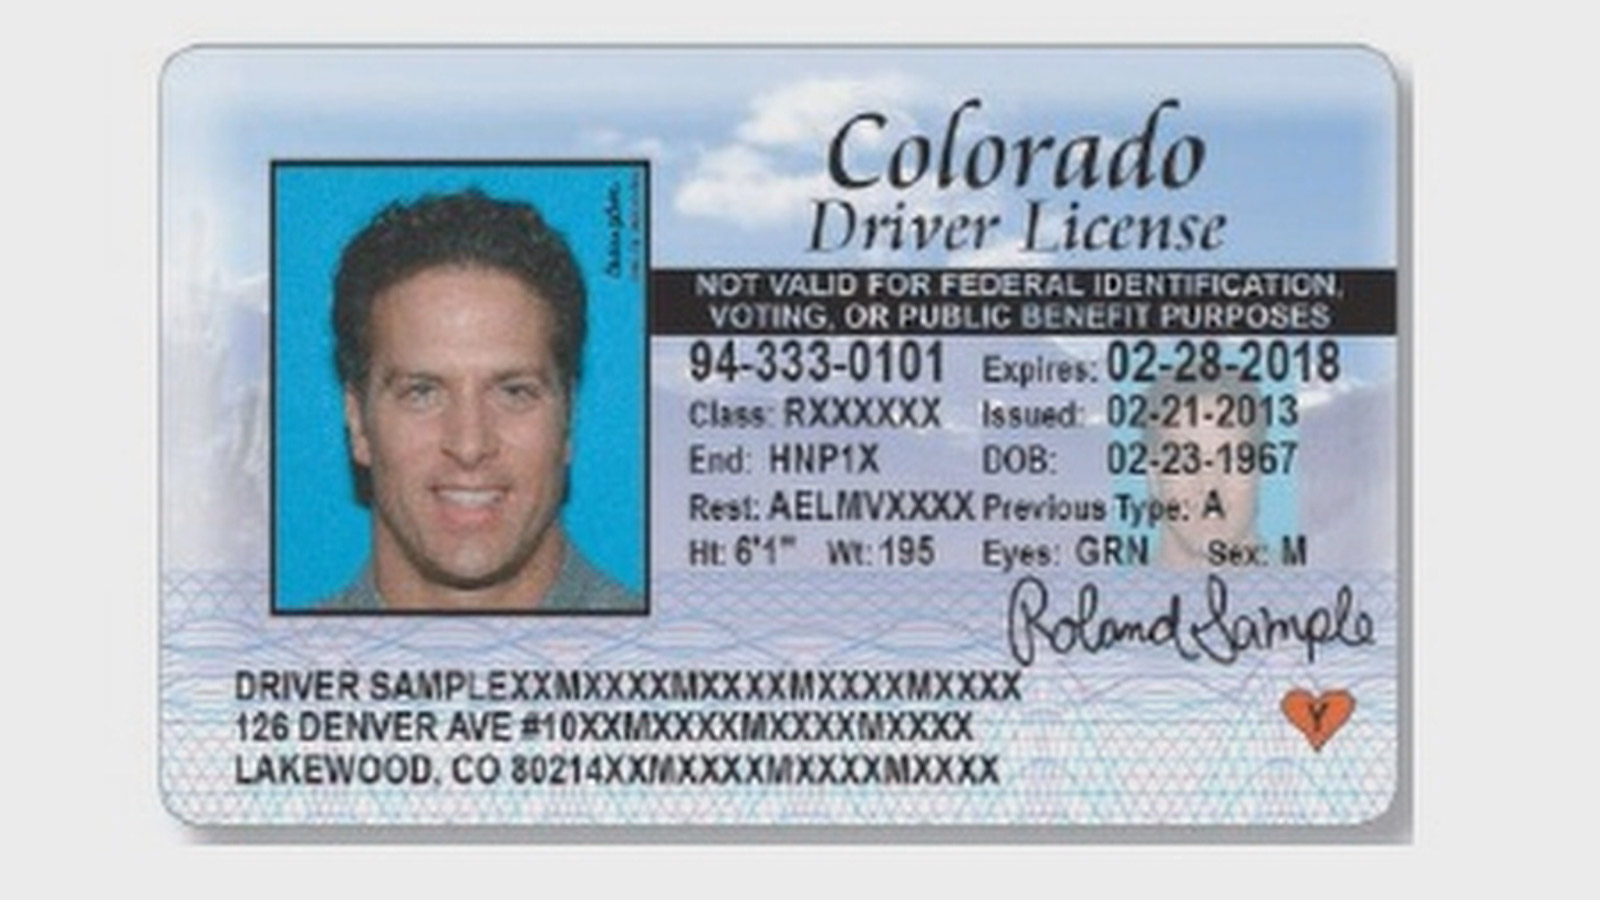 License Number Example